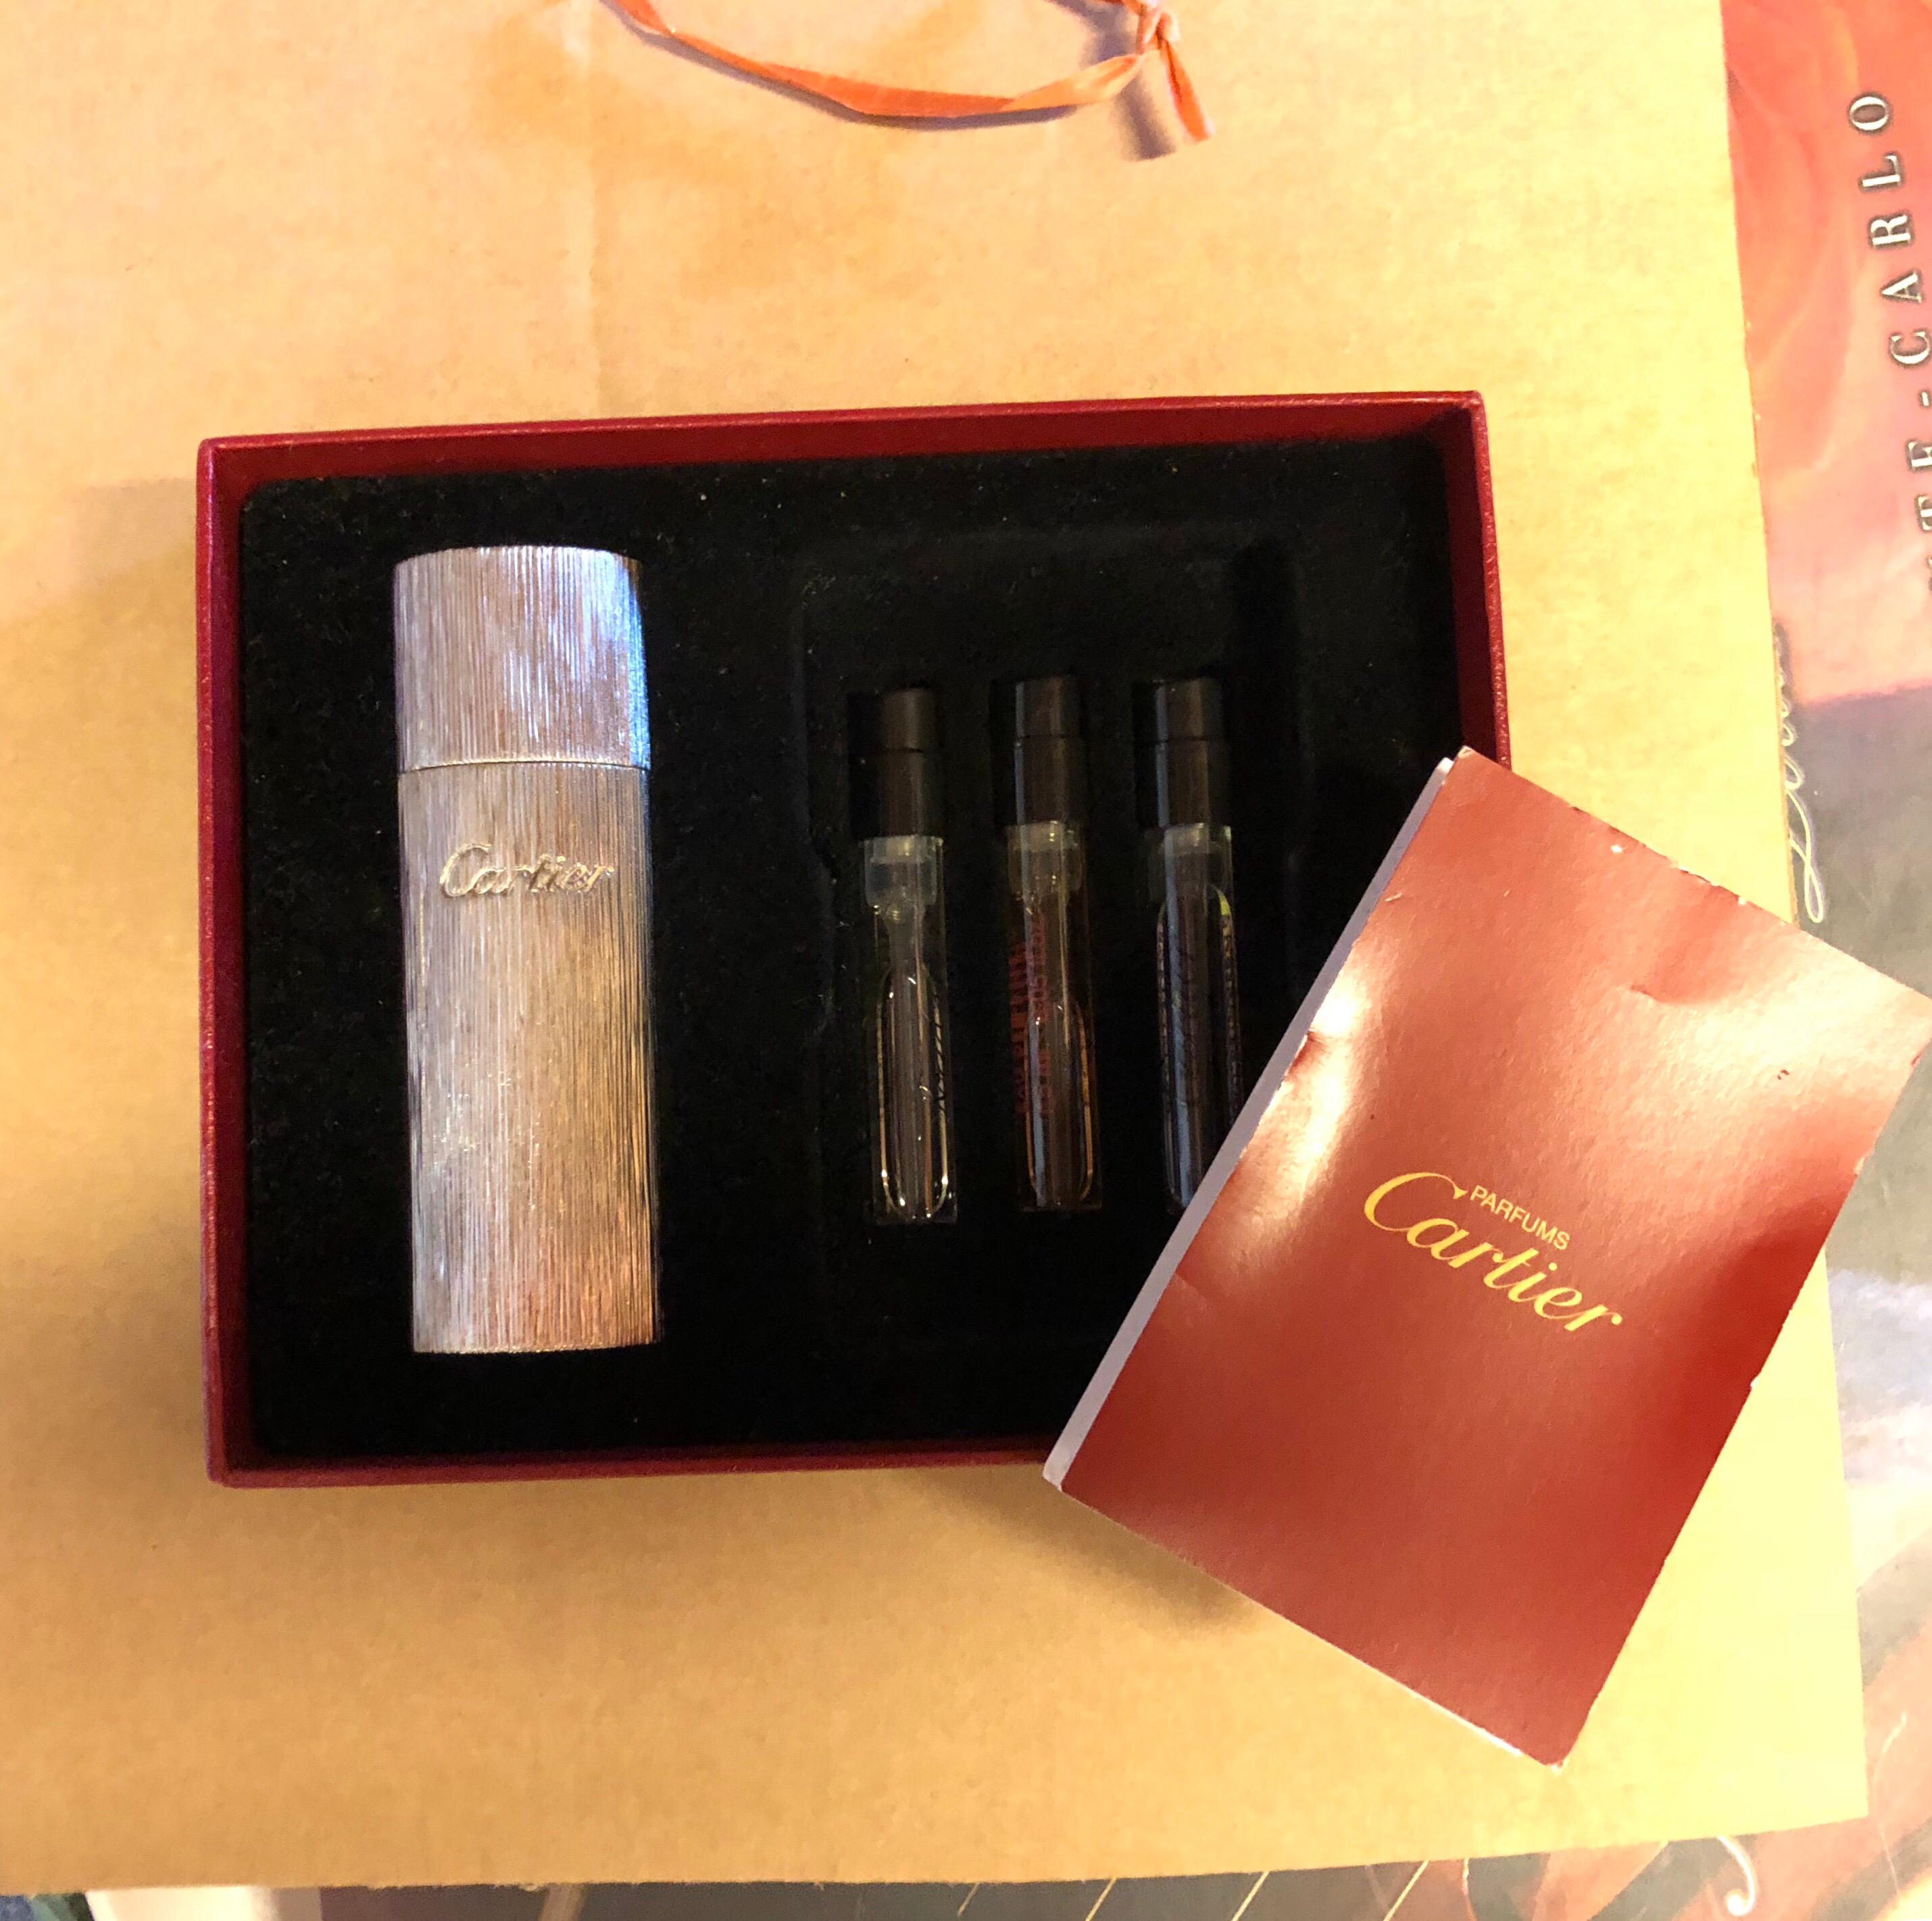 Authentic Cartier silver refillable pocket perfume purse spray

Vaporisatuer de Sac Rechargeable, refillable pocket spray parfum vial/bottle with cover
The beautiful metal casing is a carved silver-finished oval and comes with 3 1.5 ML Cartier